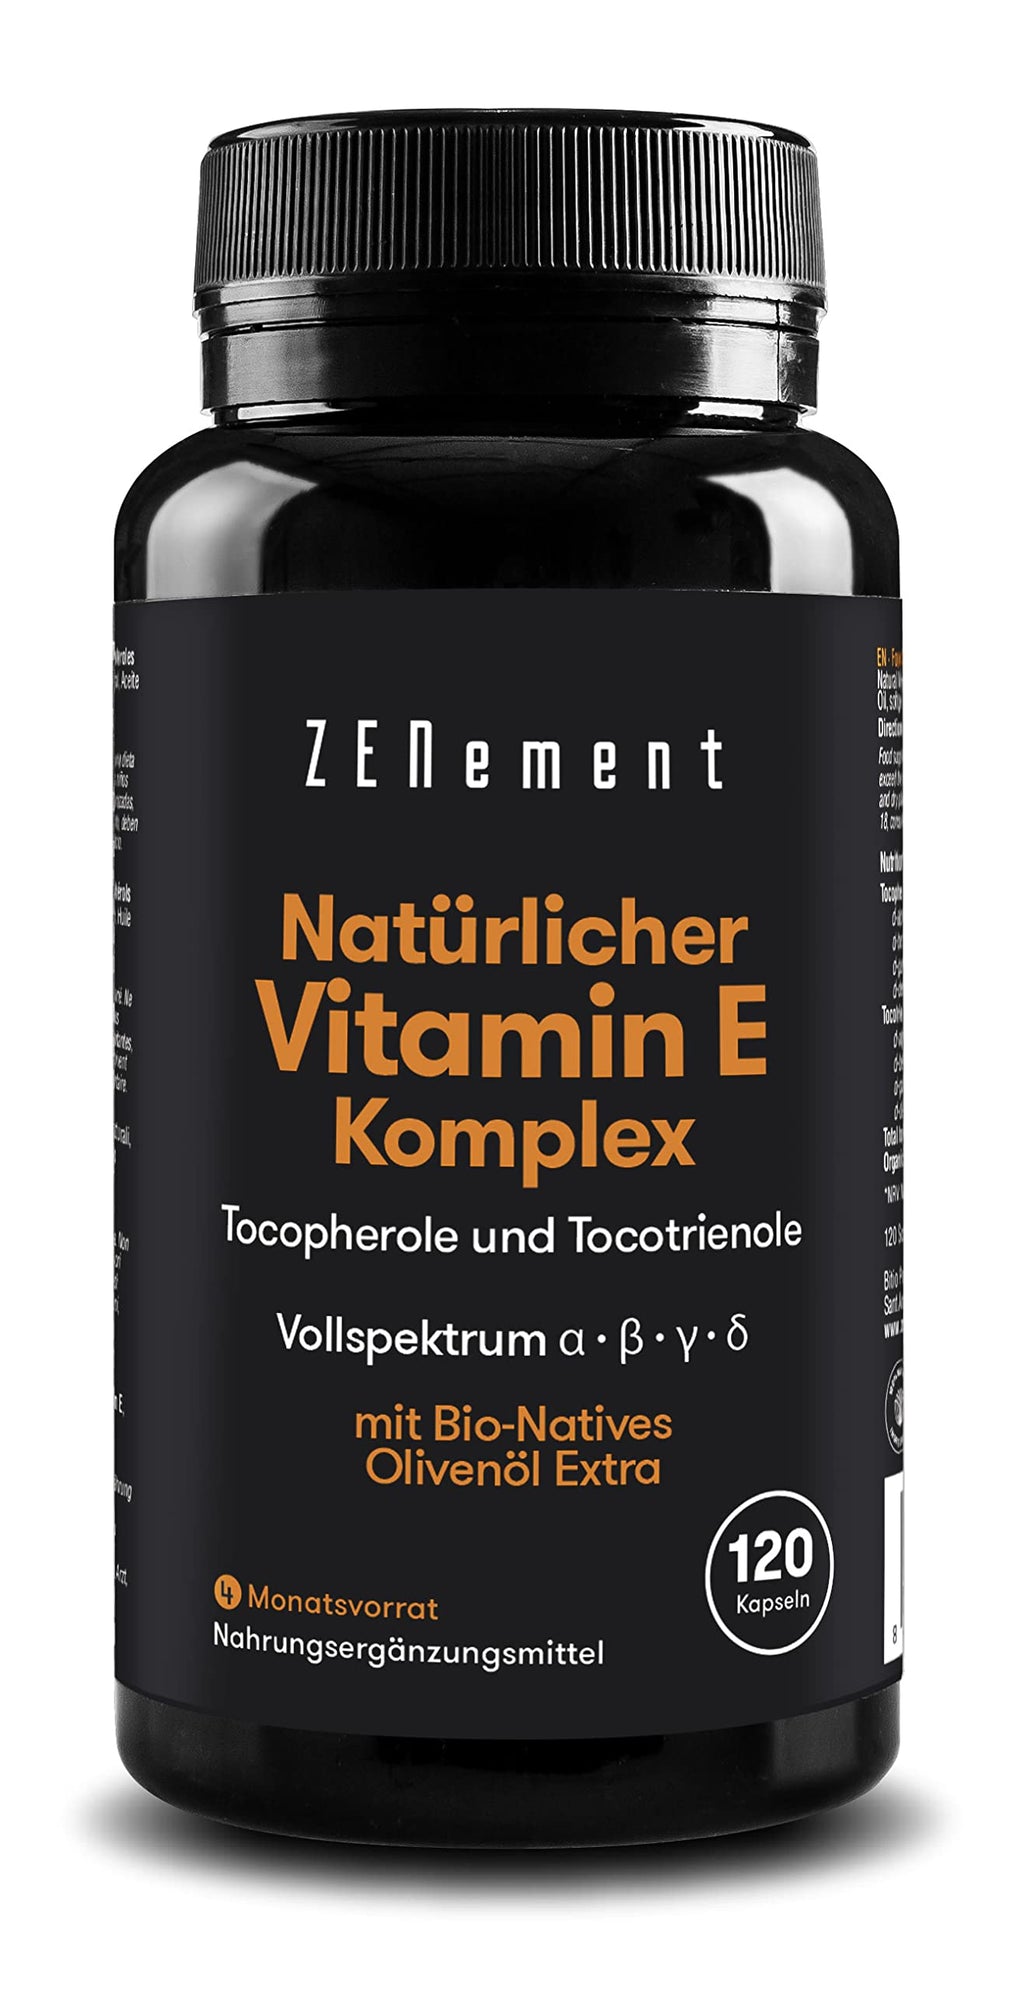 Natural Vitamin E Complex, Tocopherols & Tocotrienols, 120 Soft Capsules | with organic extra virgin olive oil | Full Spectrum | Antioxidant | Laboratory tested, soy free | Zenement - NewNest Australia